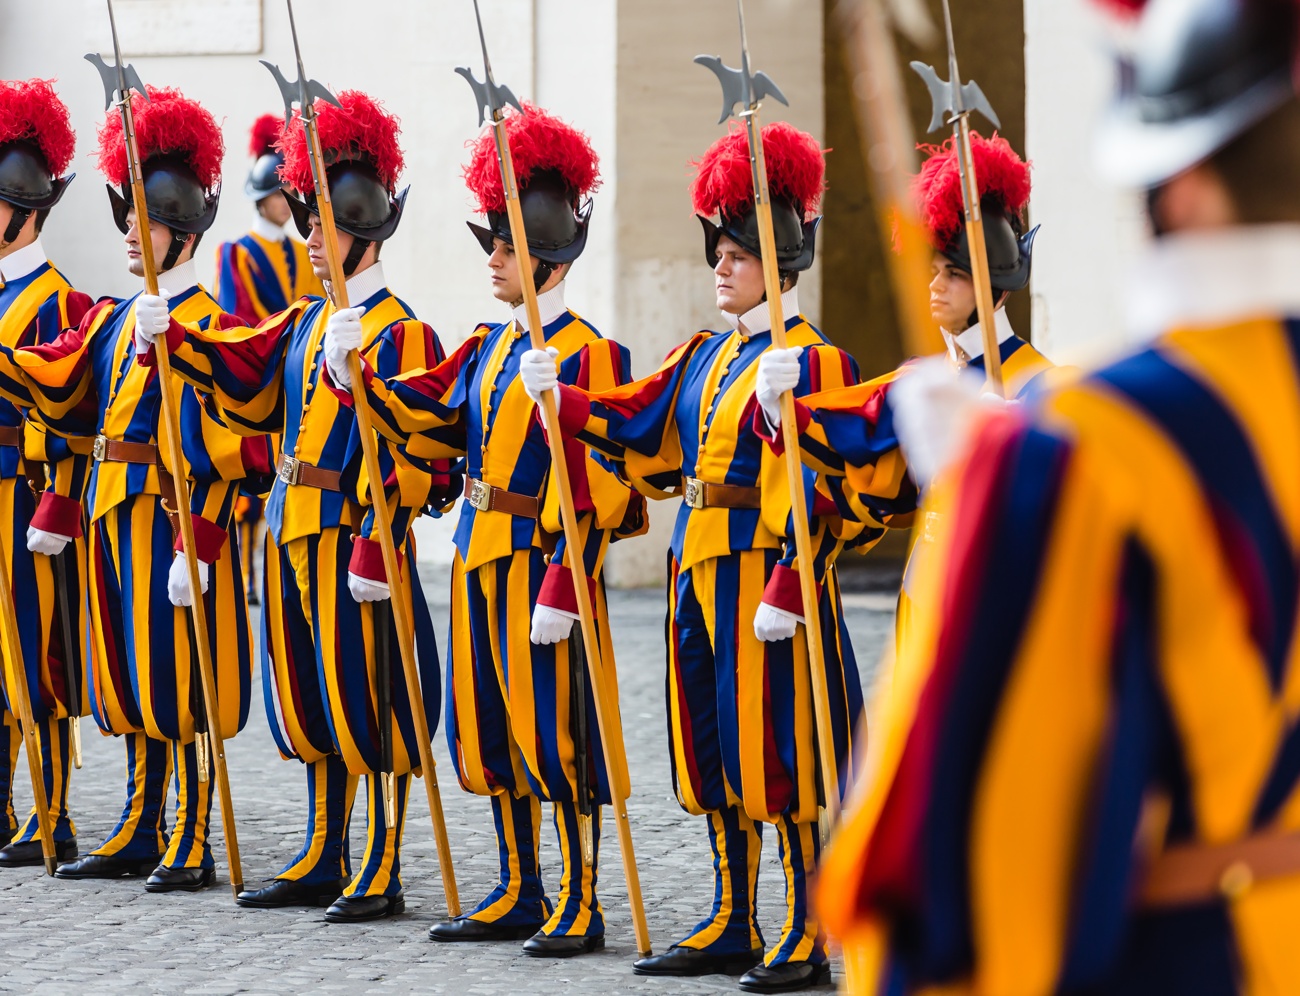 The Vatican: The Swiss Guard